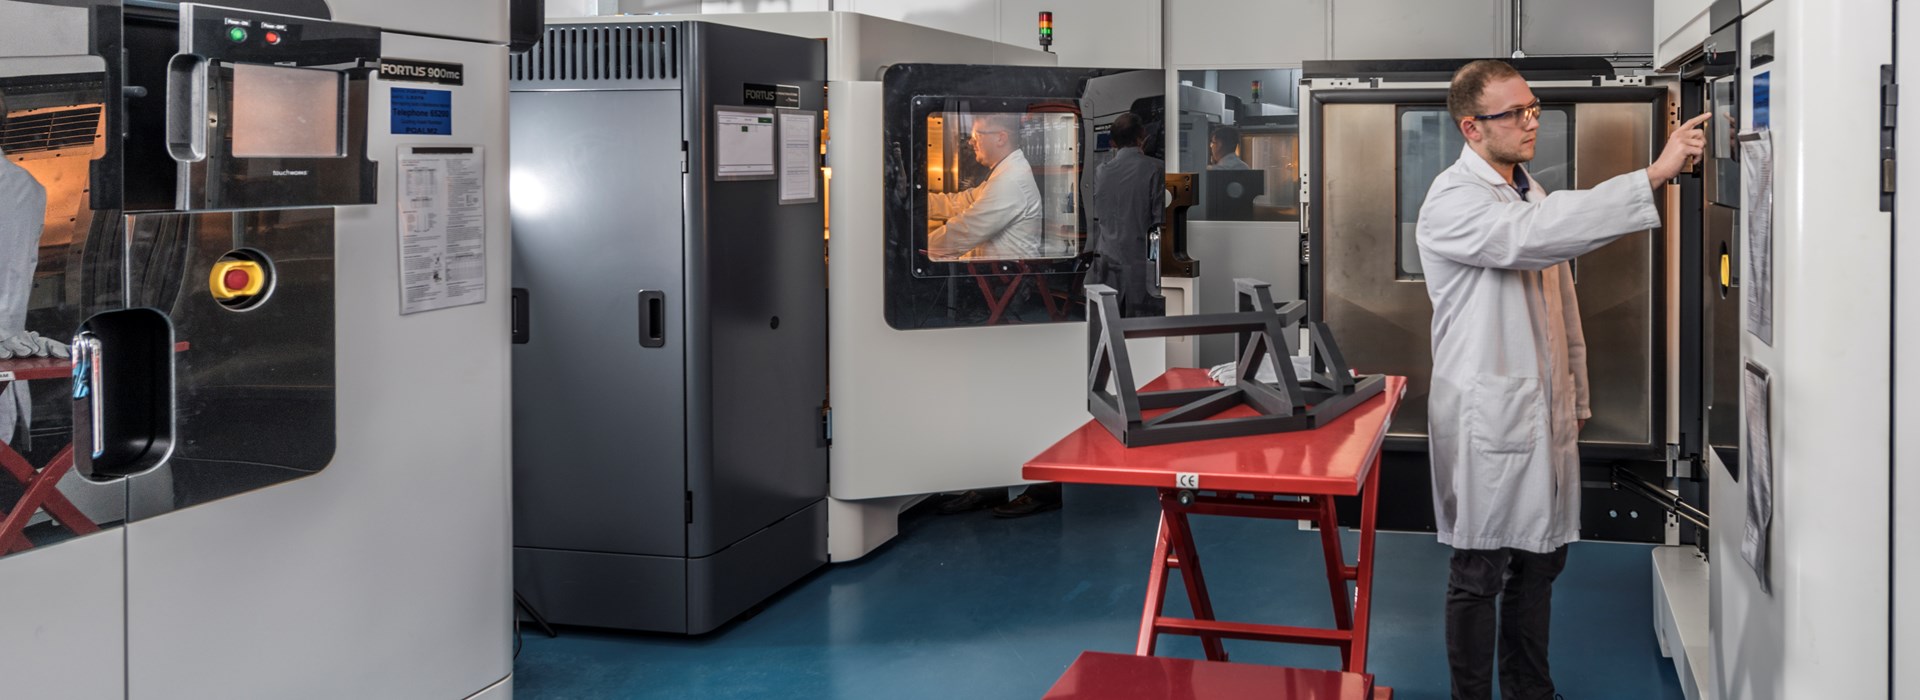 BAE Systems’ fourth Stratasys F900 3D printer will serve as an integral aspect of the company’s Factory of the Future initiative.